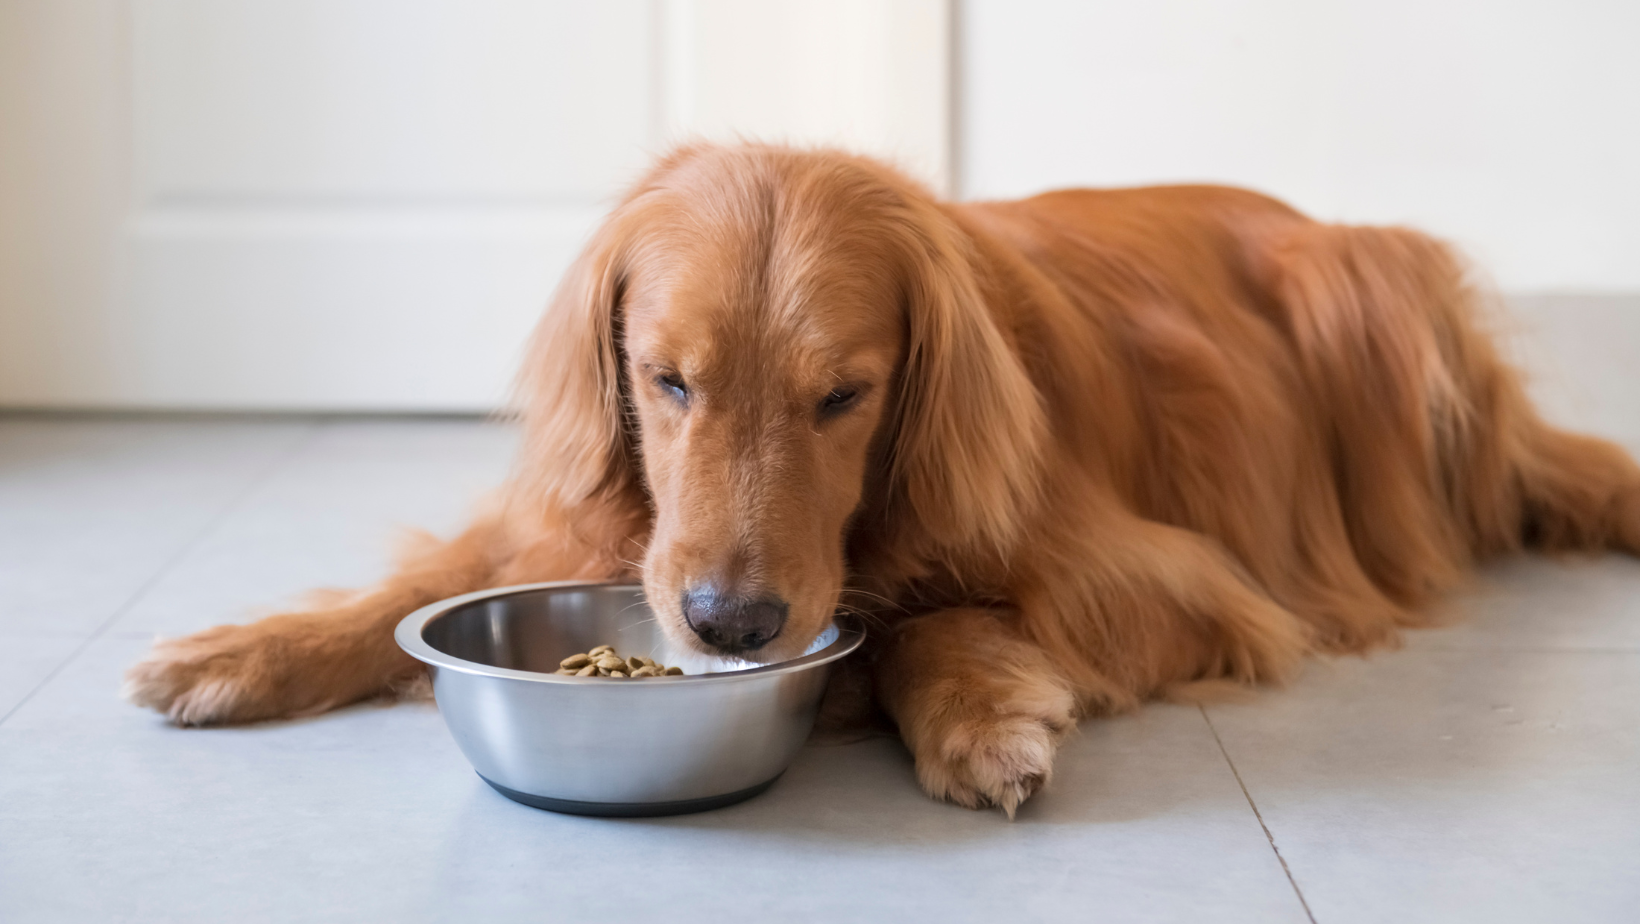 How Do I Get My Dog To Eat Slower?